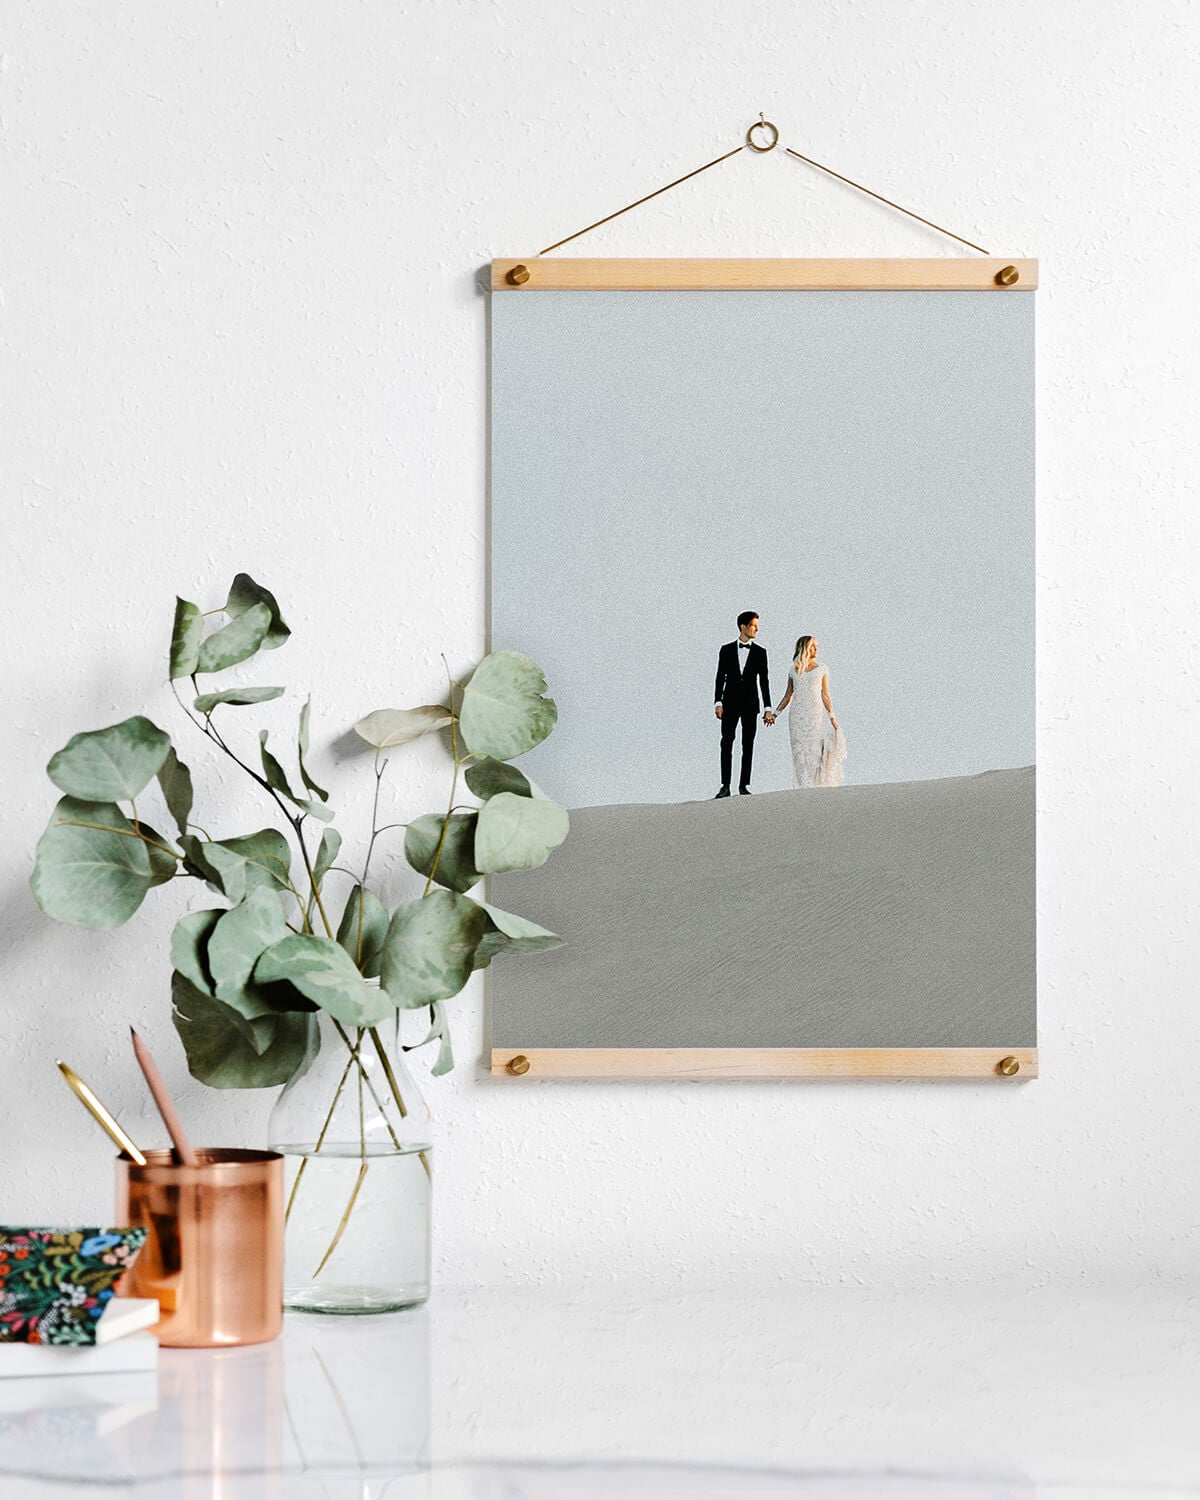 Wooden photo hanger with photo of couple on wedding day